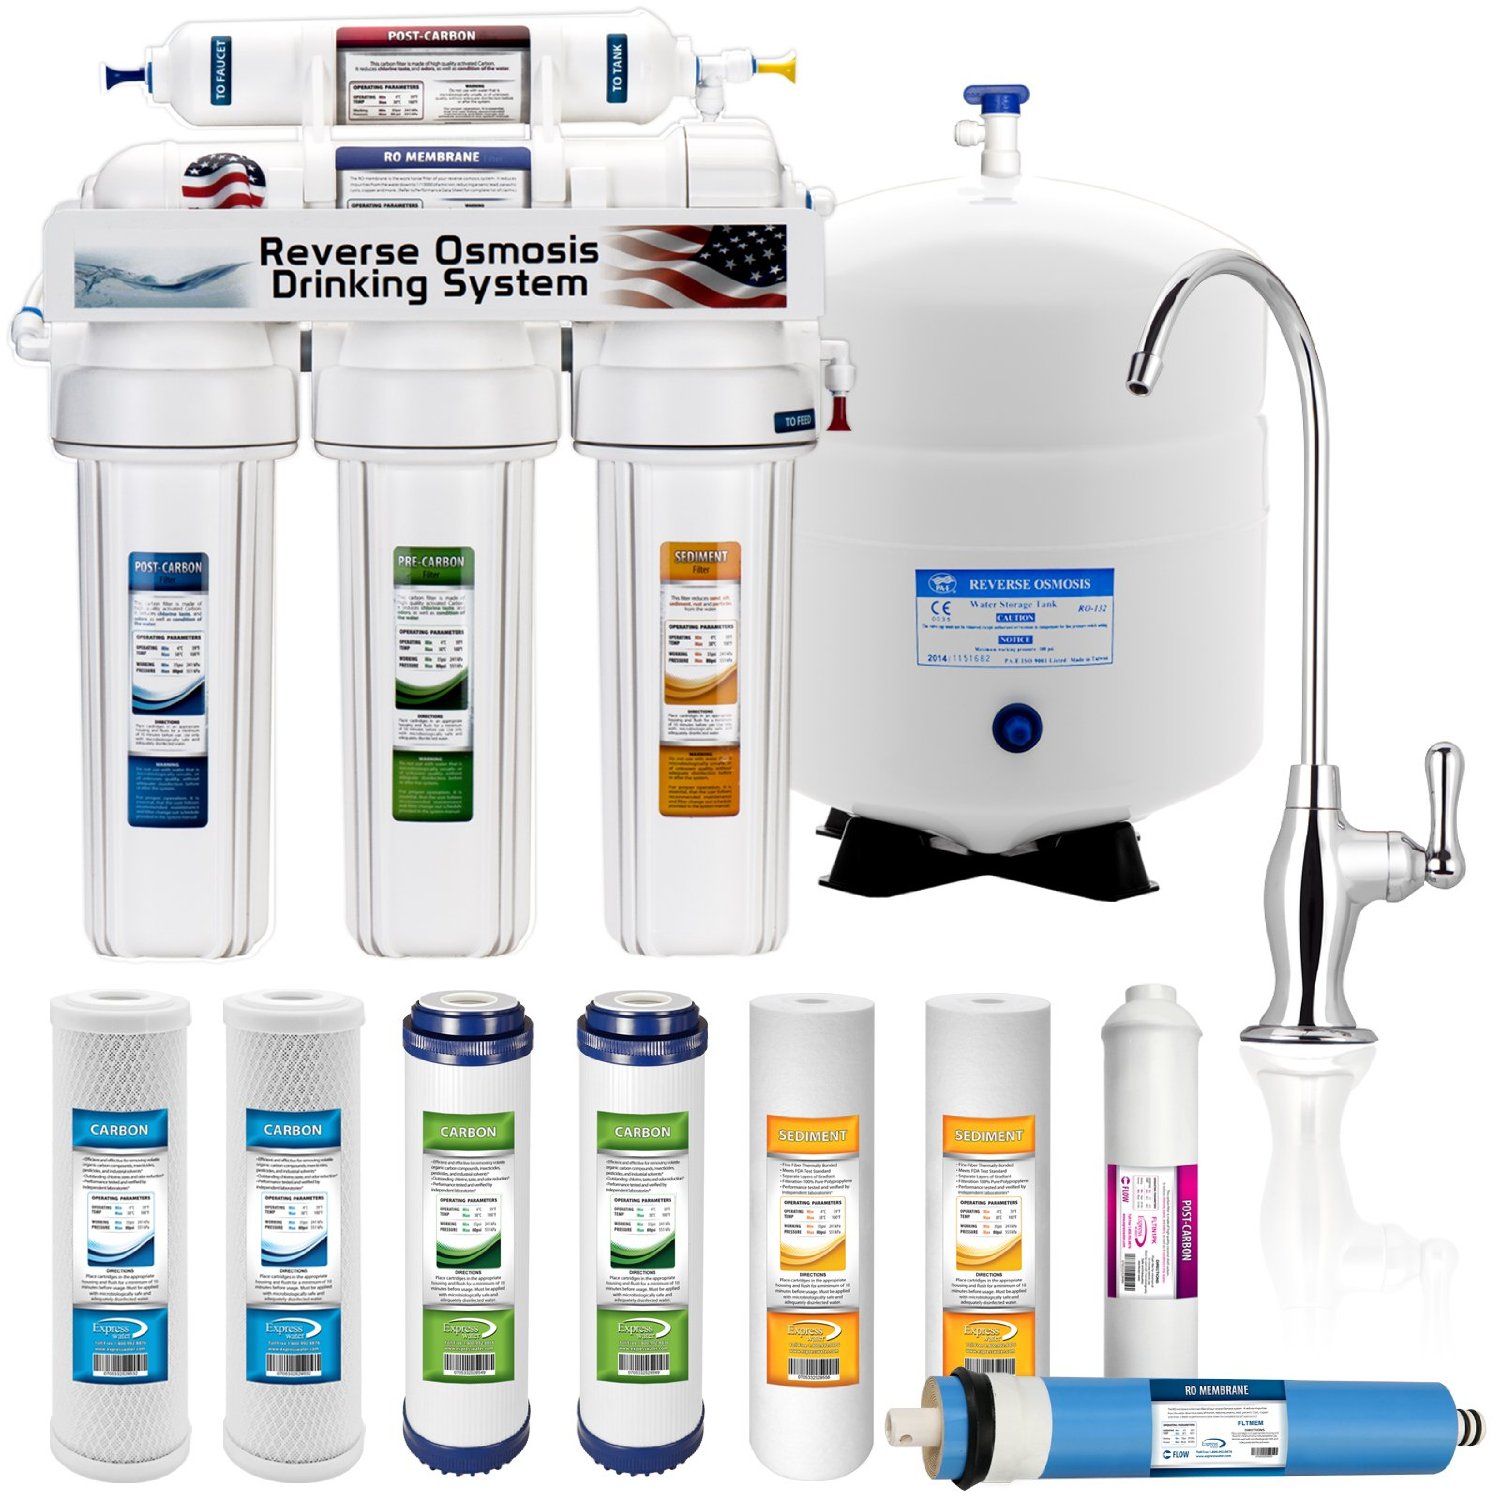 2. 5 Stage Home Drinking Reverse Osmosis System PLUS Extra Full Set- 4 Water Filter